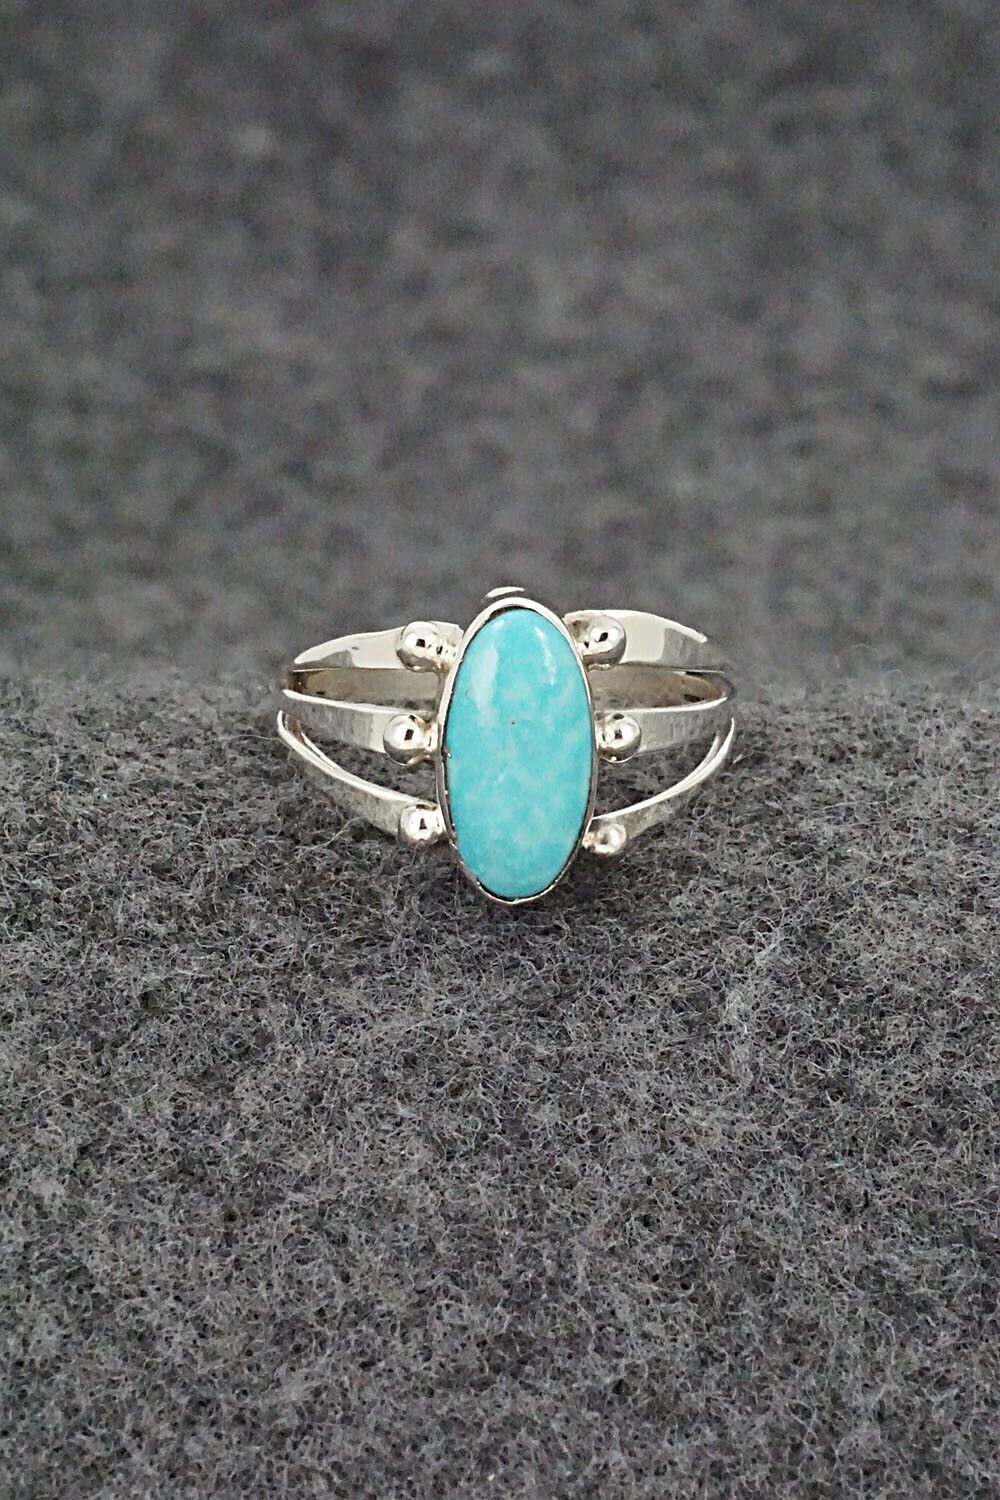 Turquoise & Sterling Silver Ring - Paige Gordon - Size 7